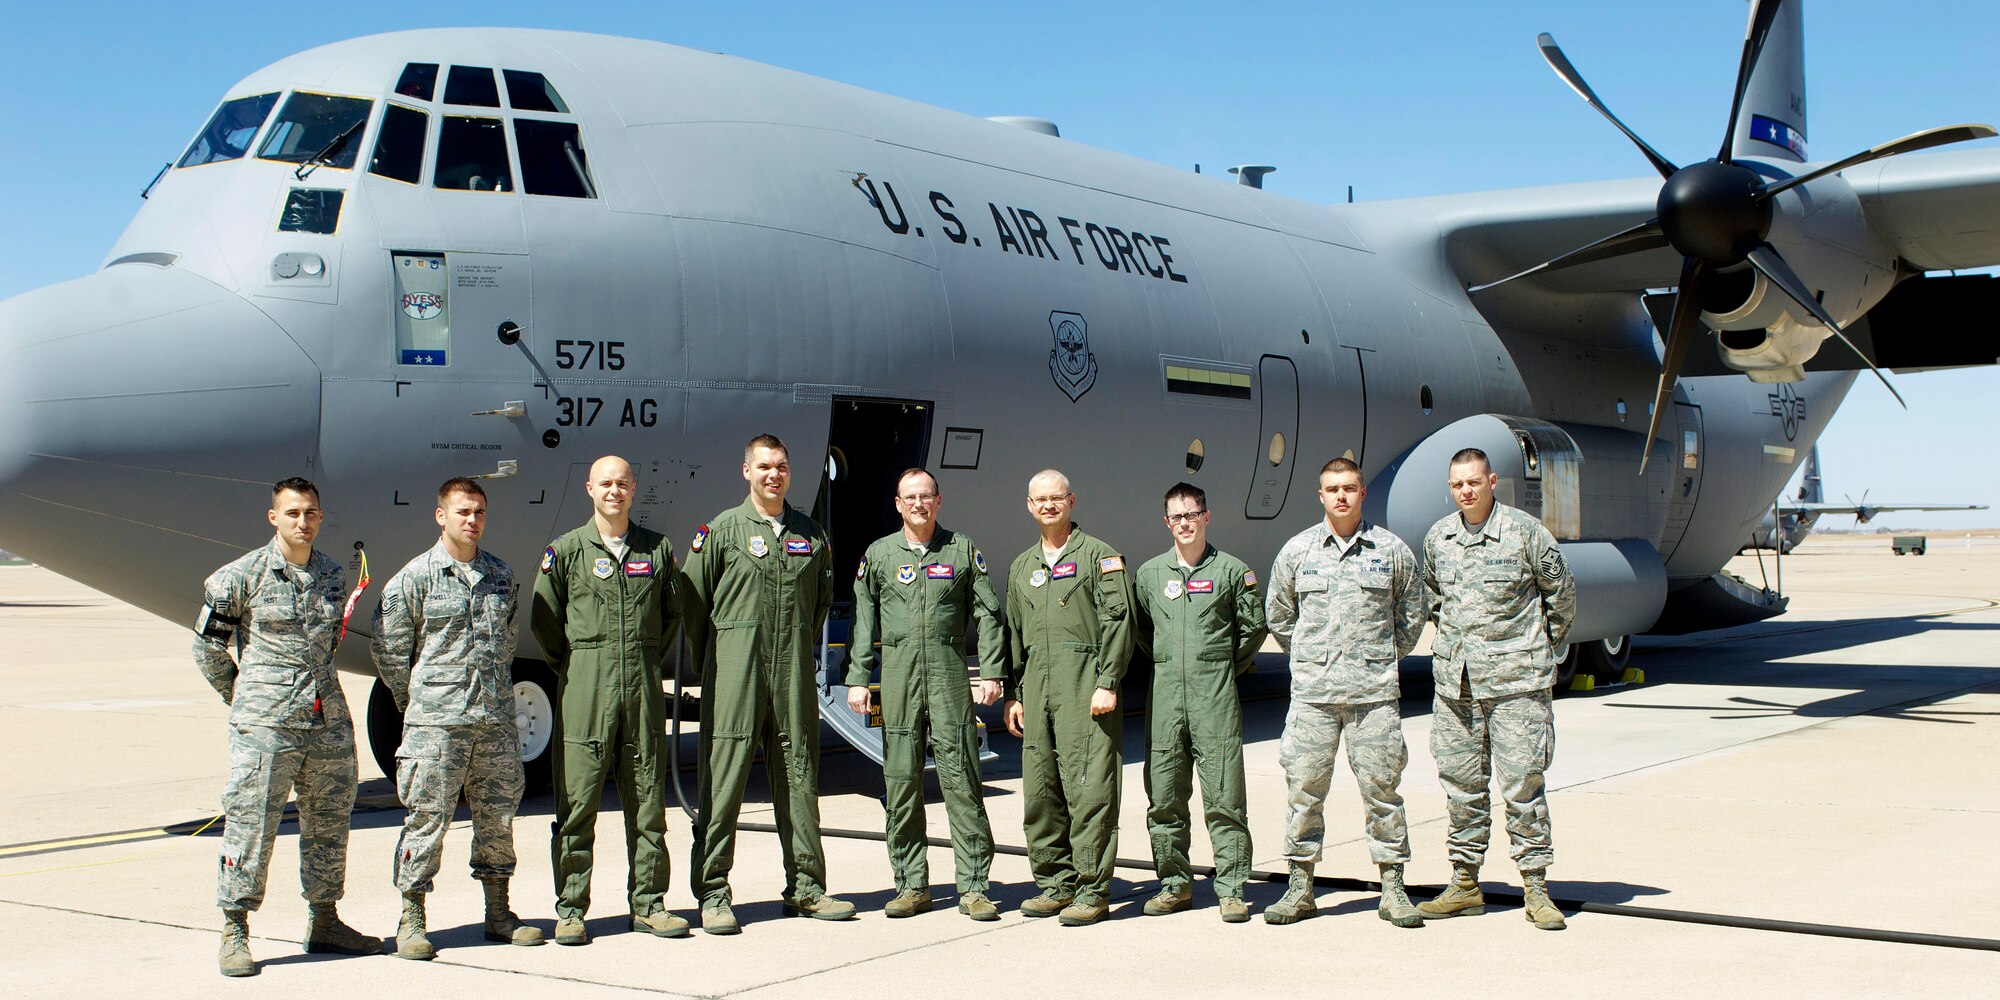 Members of the 317th Airlift Group pose for a group photo with Air Force Maj. Gen. Richard C. Johnston, assistant deputy under secretary of the Air Force, international affairs, after the delivery March 12, 2013, at Dyess Air Force Base, Texas. Dyess has received 26 of 28 J-Models and expects the next to be delivered in June. (U.S. Air Force photo by Airman 1st Class Kylsee Wisseman/ Released) 